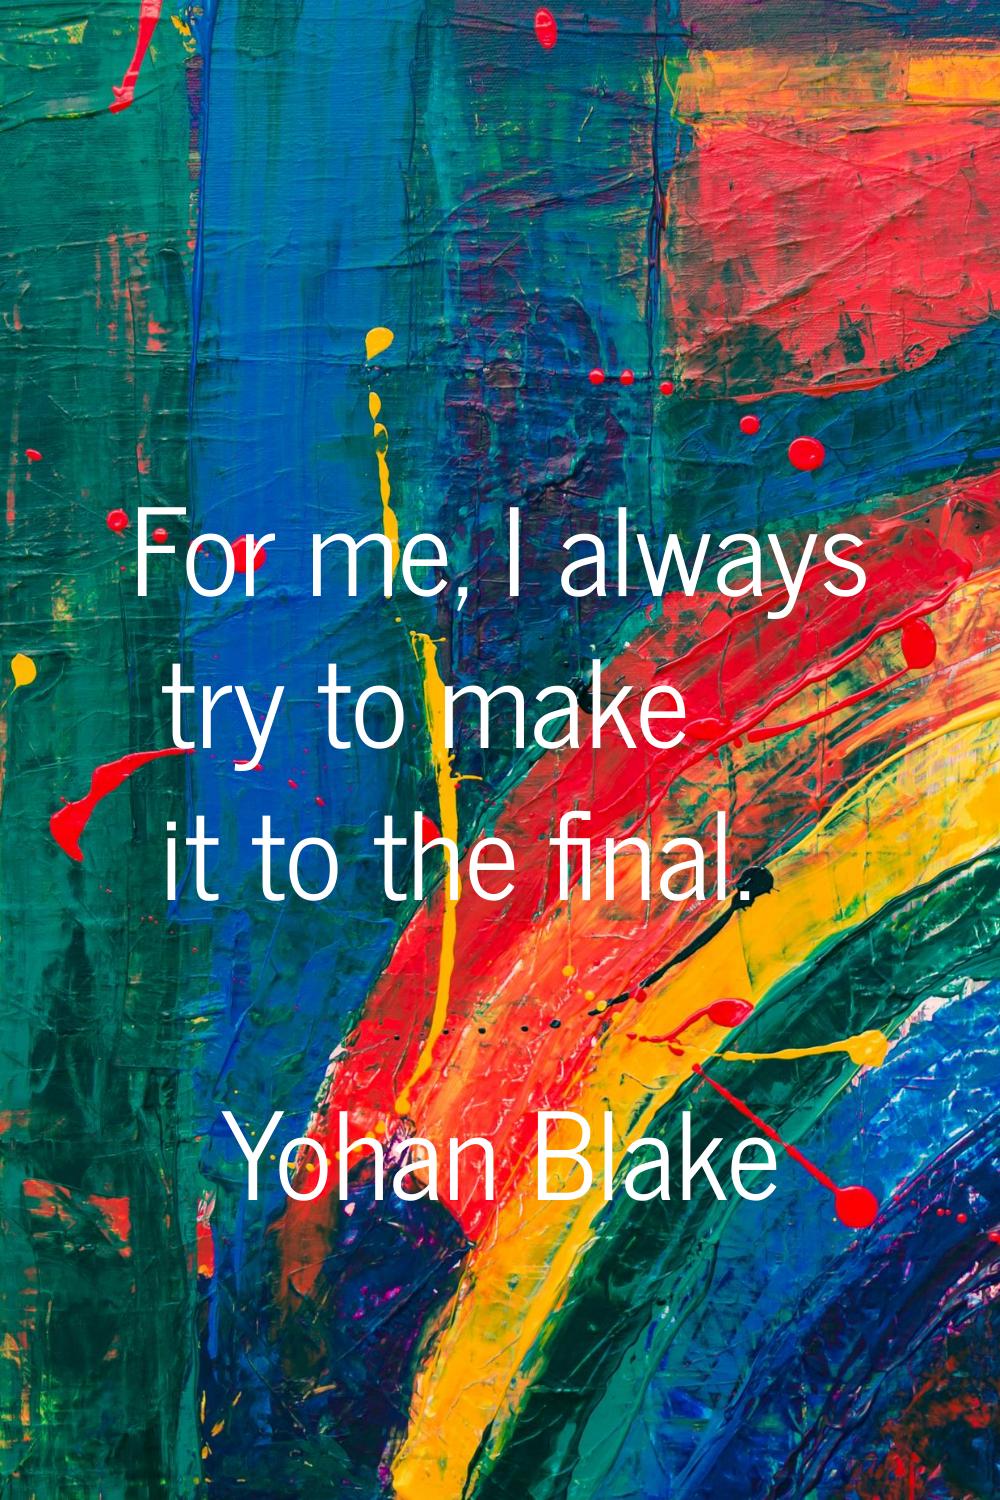 For me, I always try to make it to the final.